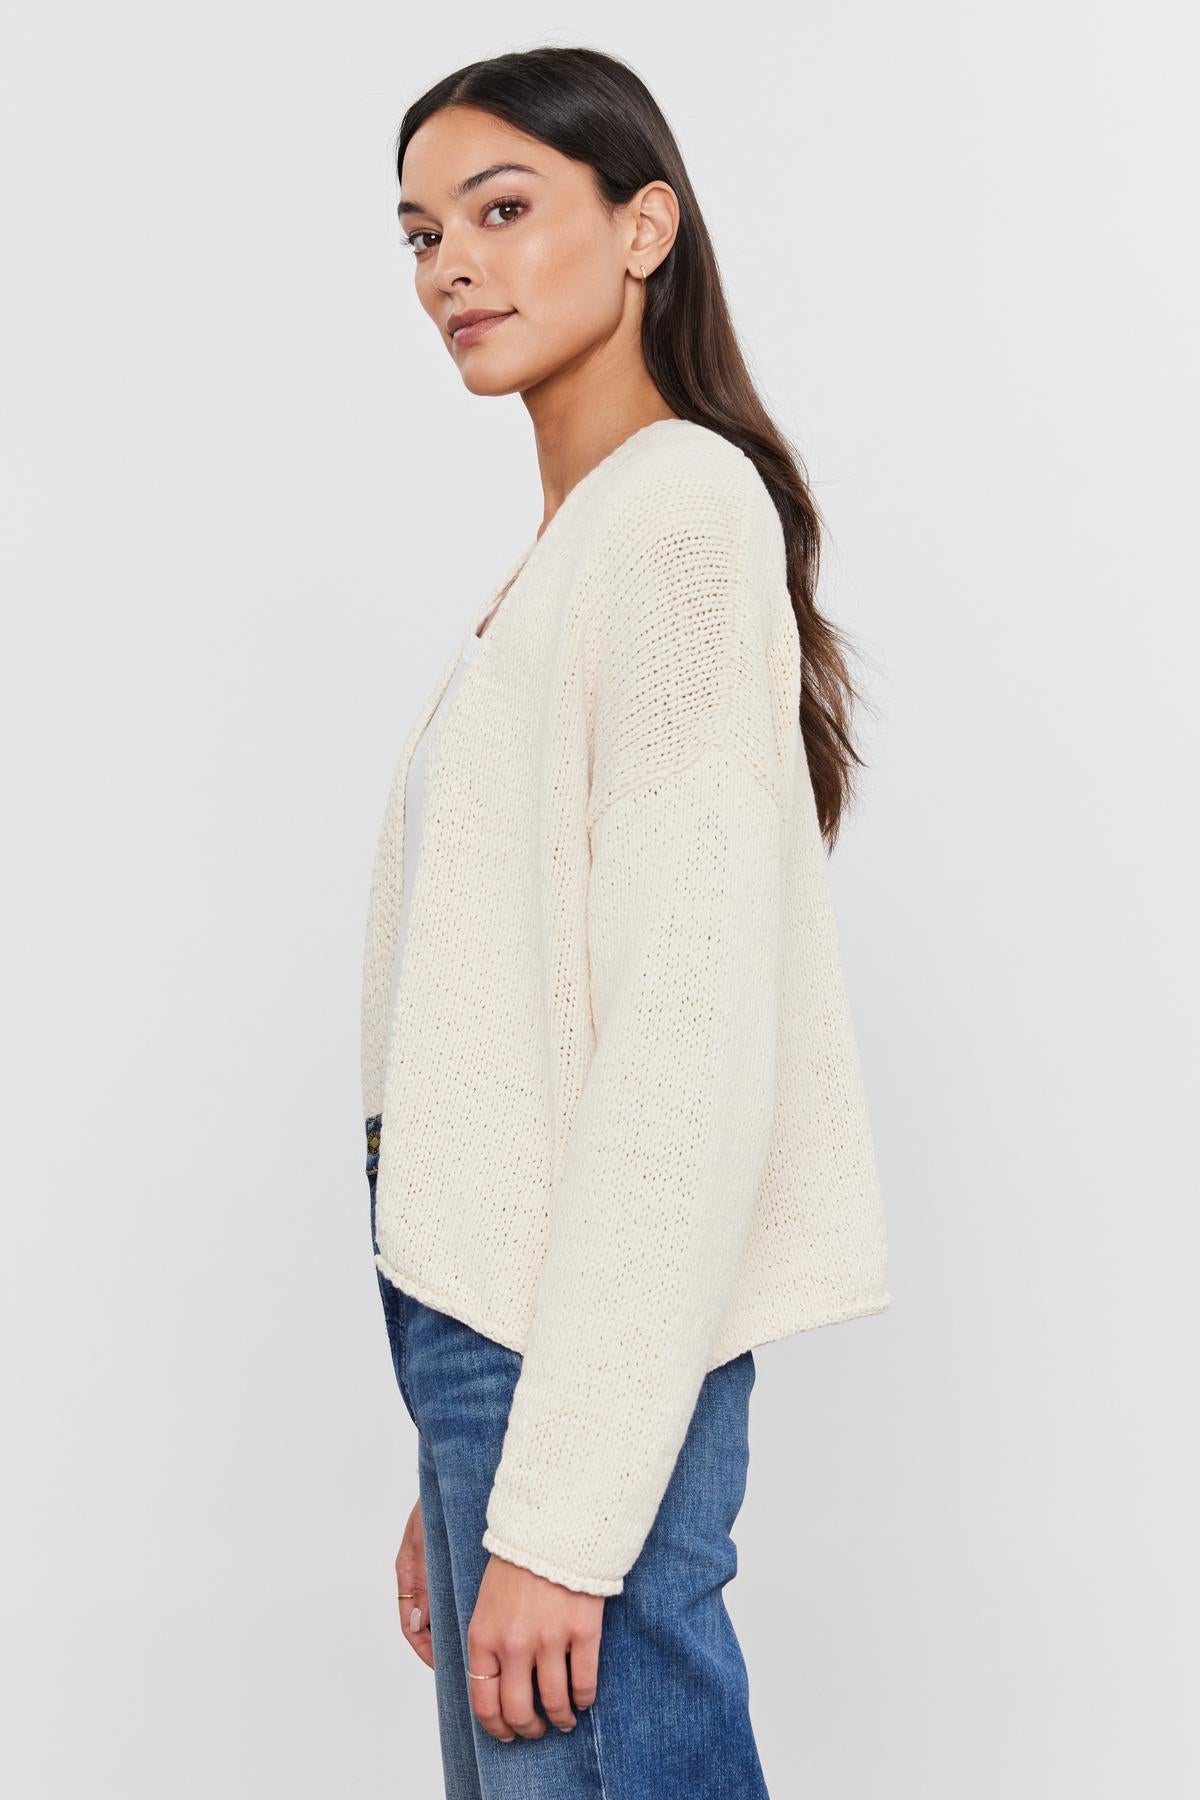 Woman in a "Velvet by Graham & Spencer" HOLLIE CARDIGAN and blue jeans standing sideways, looking at the camera over her shoulder.-36752930472129